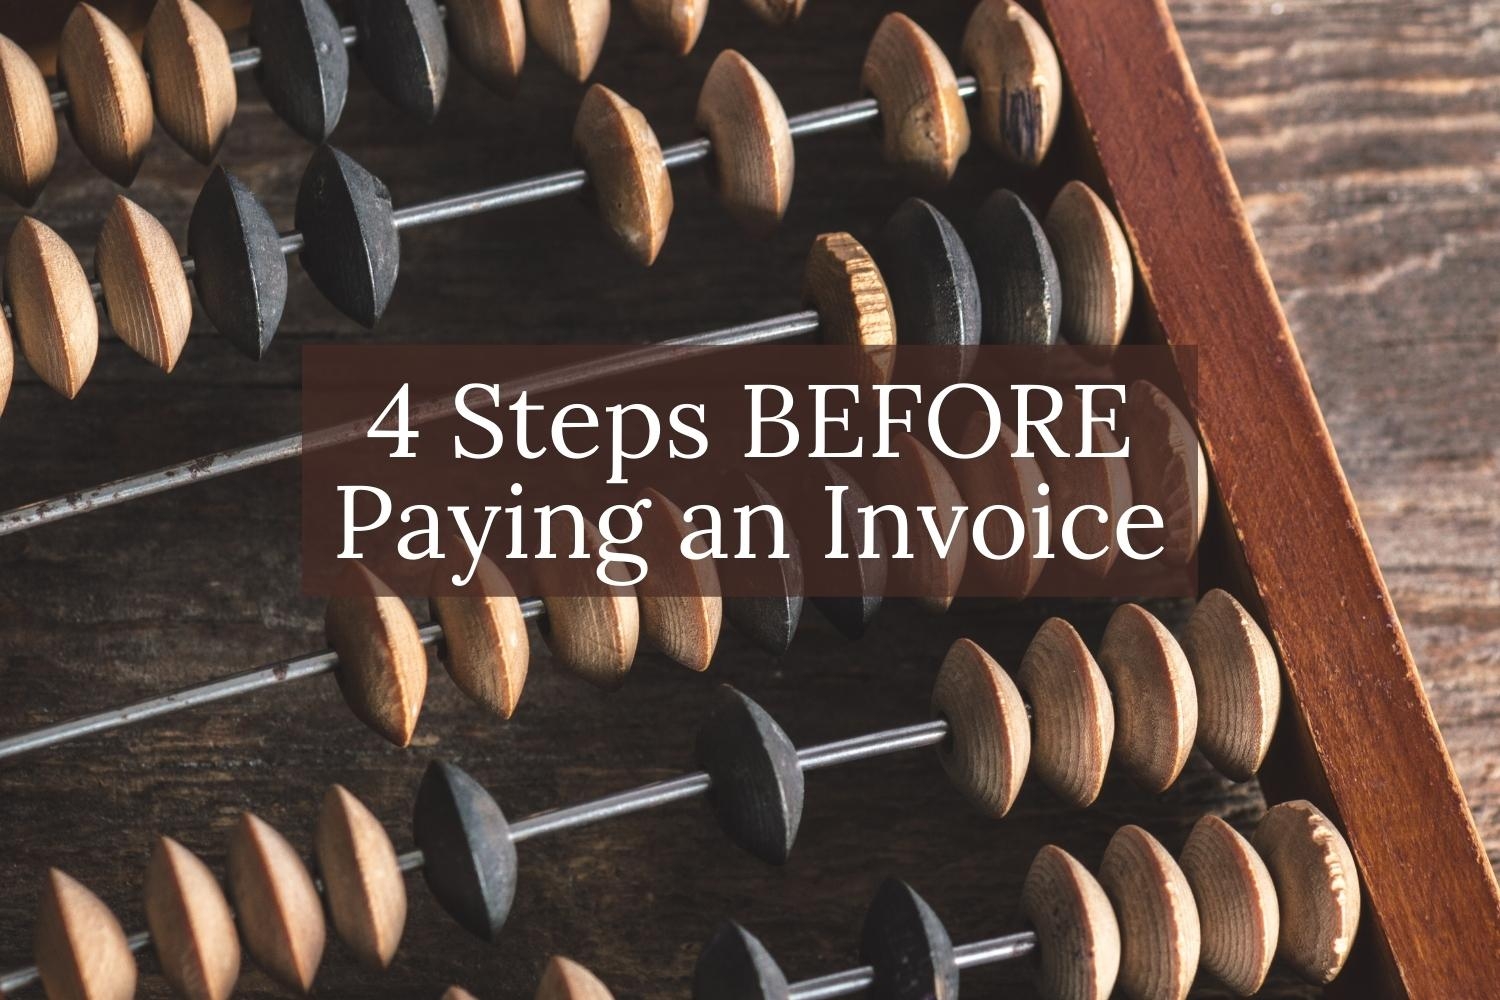 4 Steps Before Paying an Invoice to Ensure Expenses are Legit